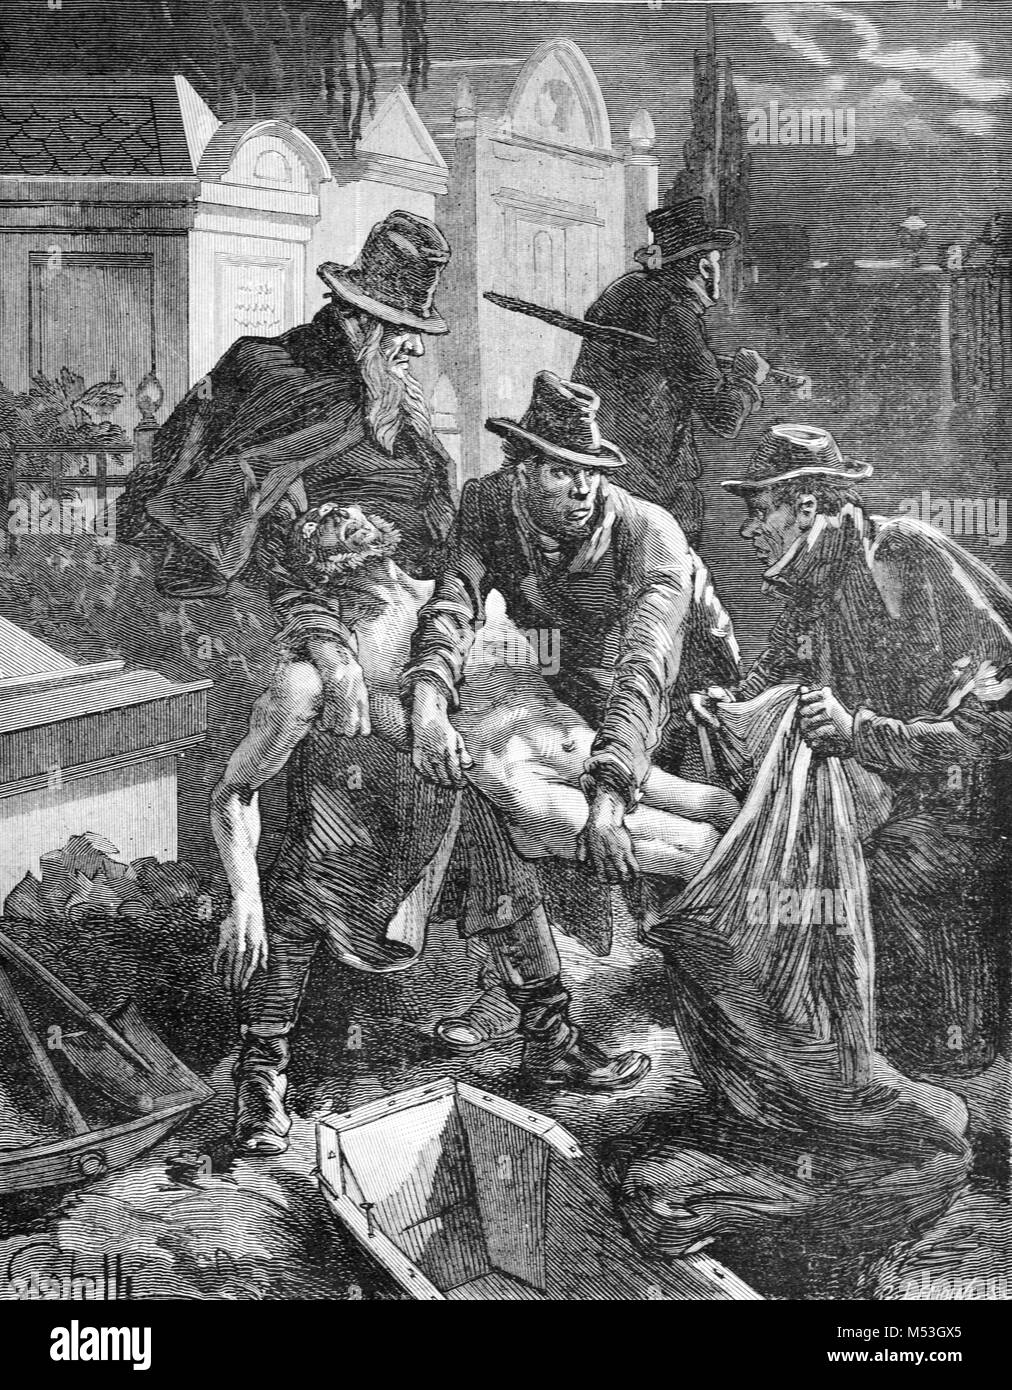 Tomb Robbers or Grave Robbers Stealing a Human Body or Cadaver from a Cemetery for Medical Research. Body Snatching was Common in the c19th when Body Snatchers aka Resurrectionists Stole Recently Buried Corpses for Dissection or Anatomy Lessons in Medical Schools (Engraving, 1888) Stock Photo